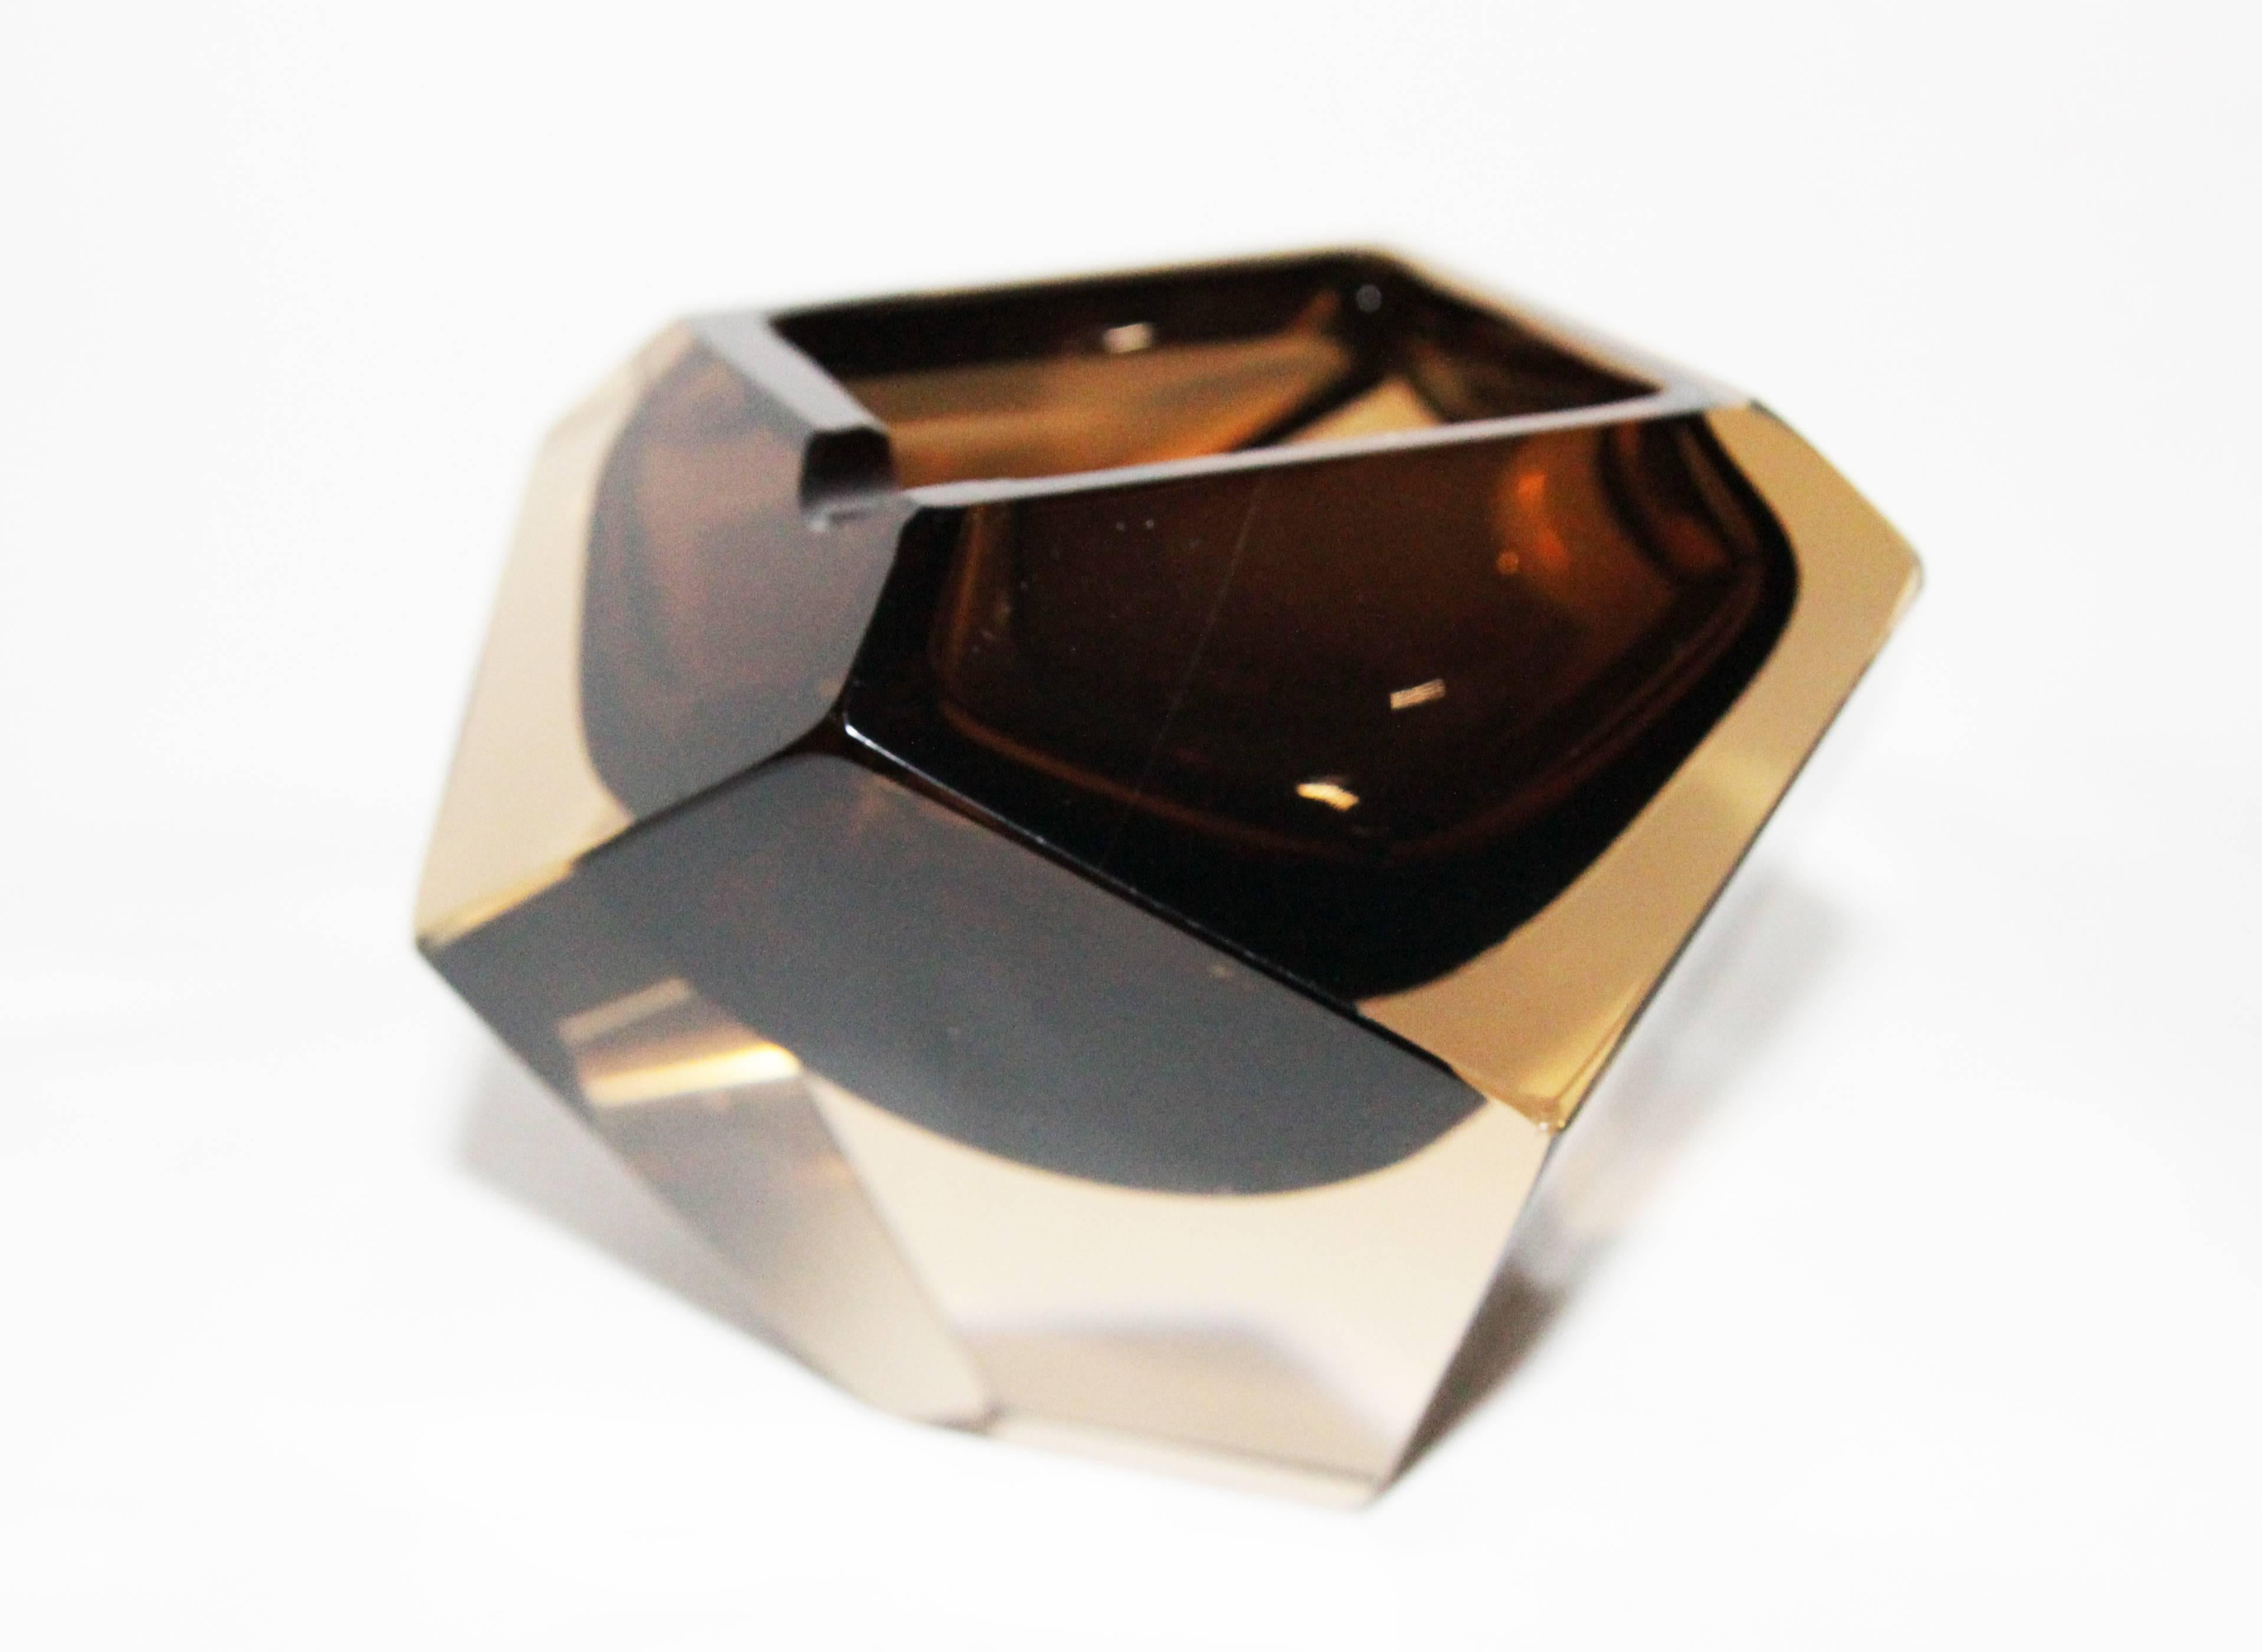 A rare set of a lighter and ashtray. Italian Murano glass, circa 1970. Amber and brown faceted glass. It's flat cut polished top, like a diamond. Fabulous shape and design. Excellent condition. Size: Diameter: 11 cm, 4.3 in, height 8 cm, 3.2 in.